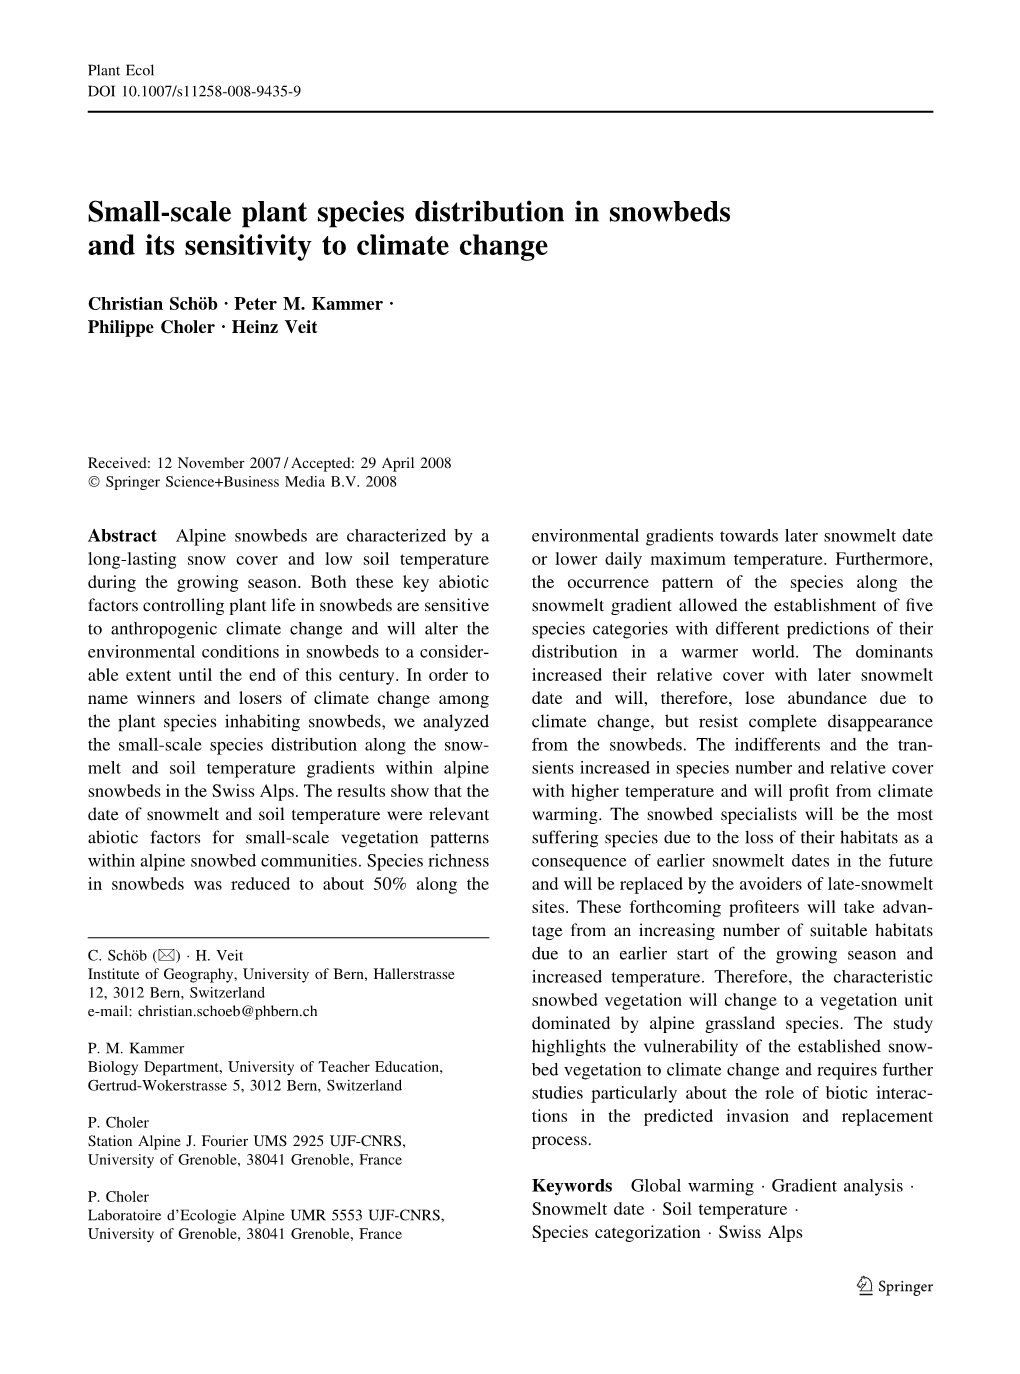 Small-Scale Plant Species Distribution in Snowbeds and Its Sensitivity to Climate Change